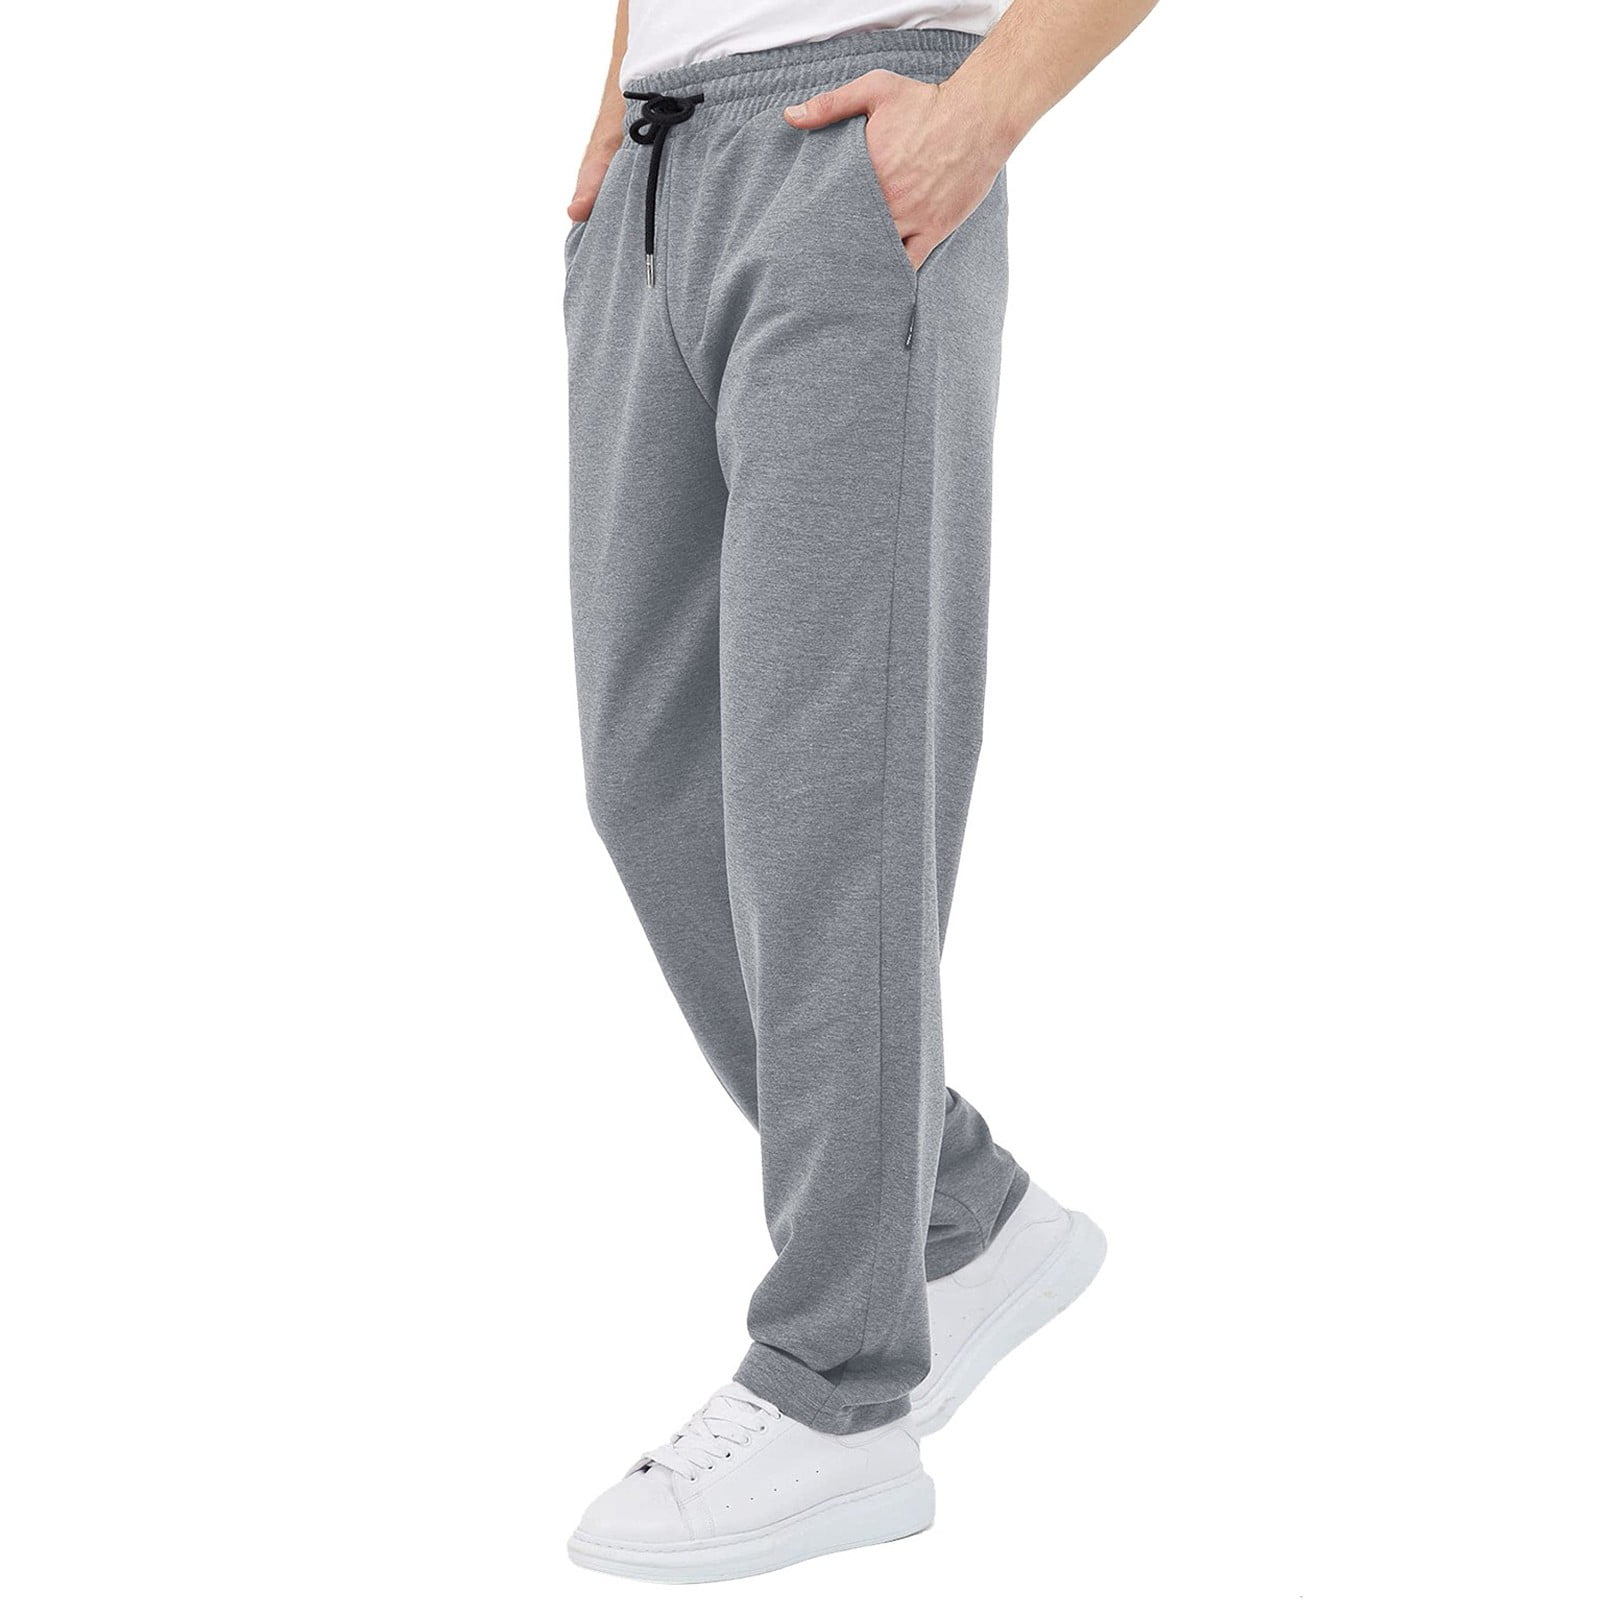 Male Punit Polyfab Mens Cotton Track Pants at Rs 295/piece in Ahmedabad |  ID: 21061066030